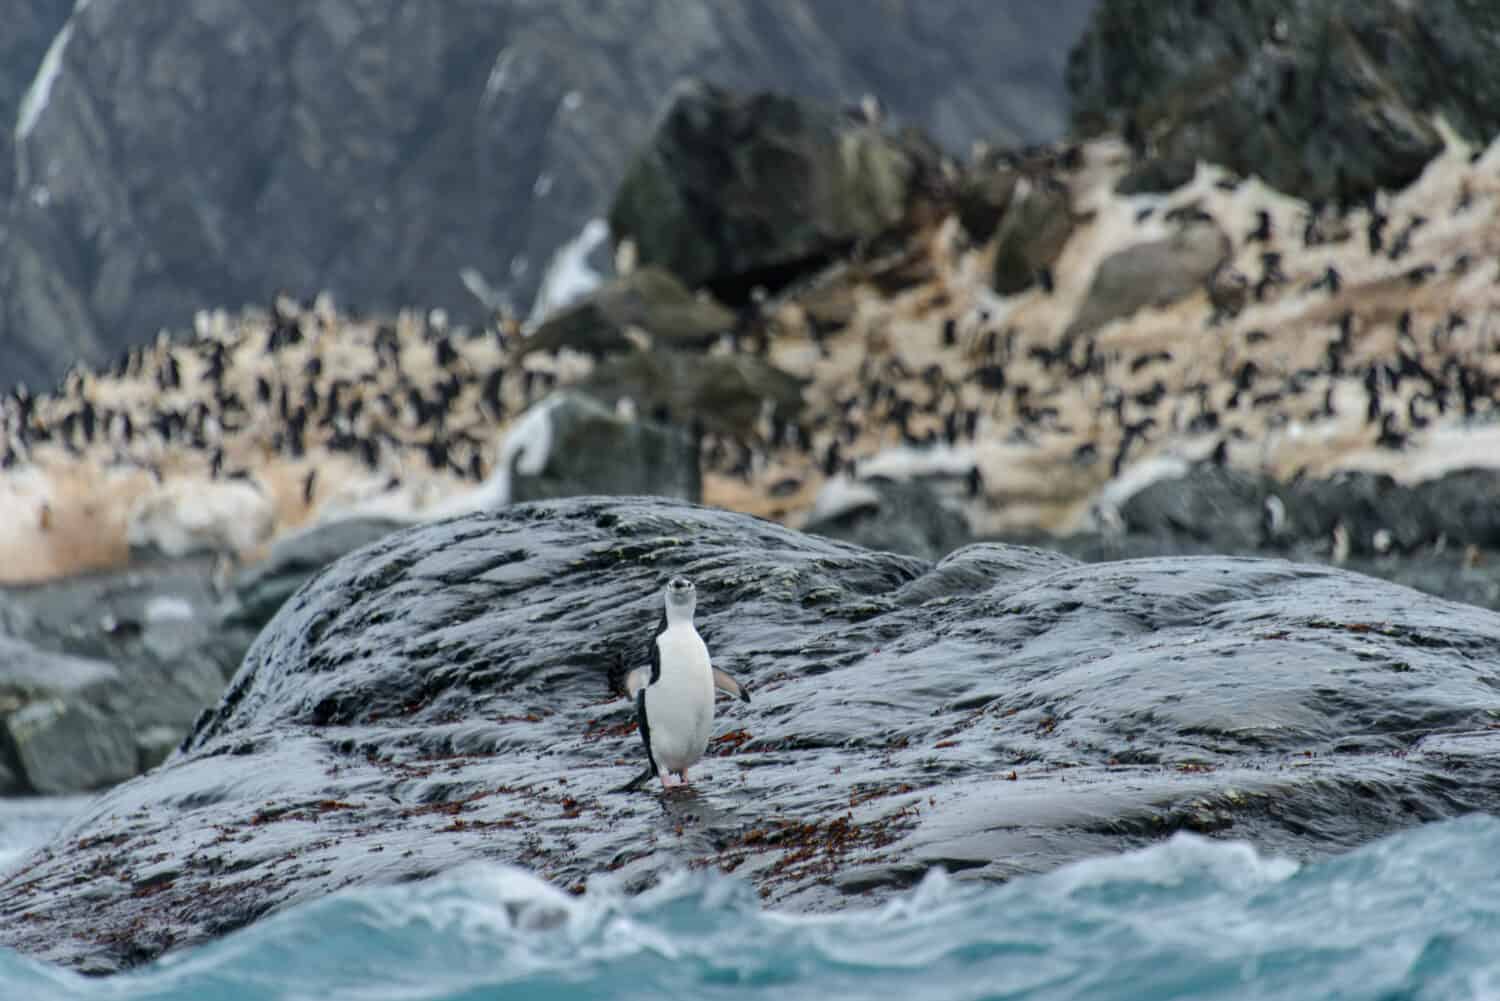 Chinstrap penguin's colony on show